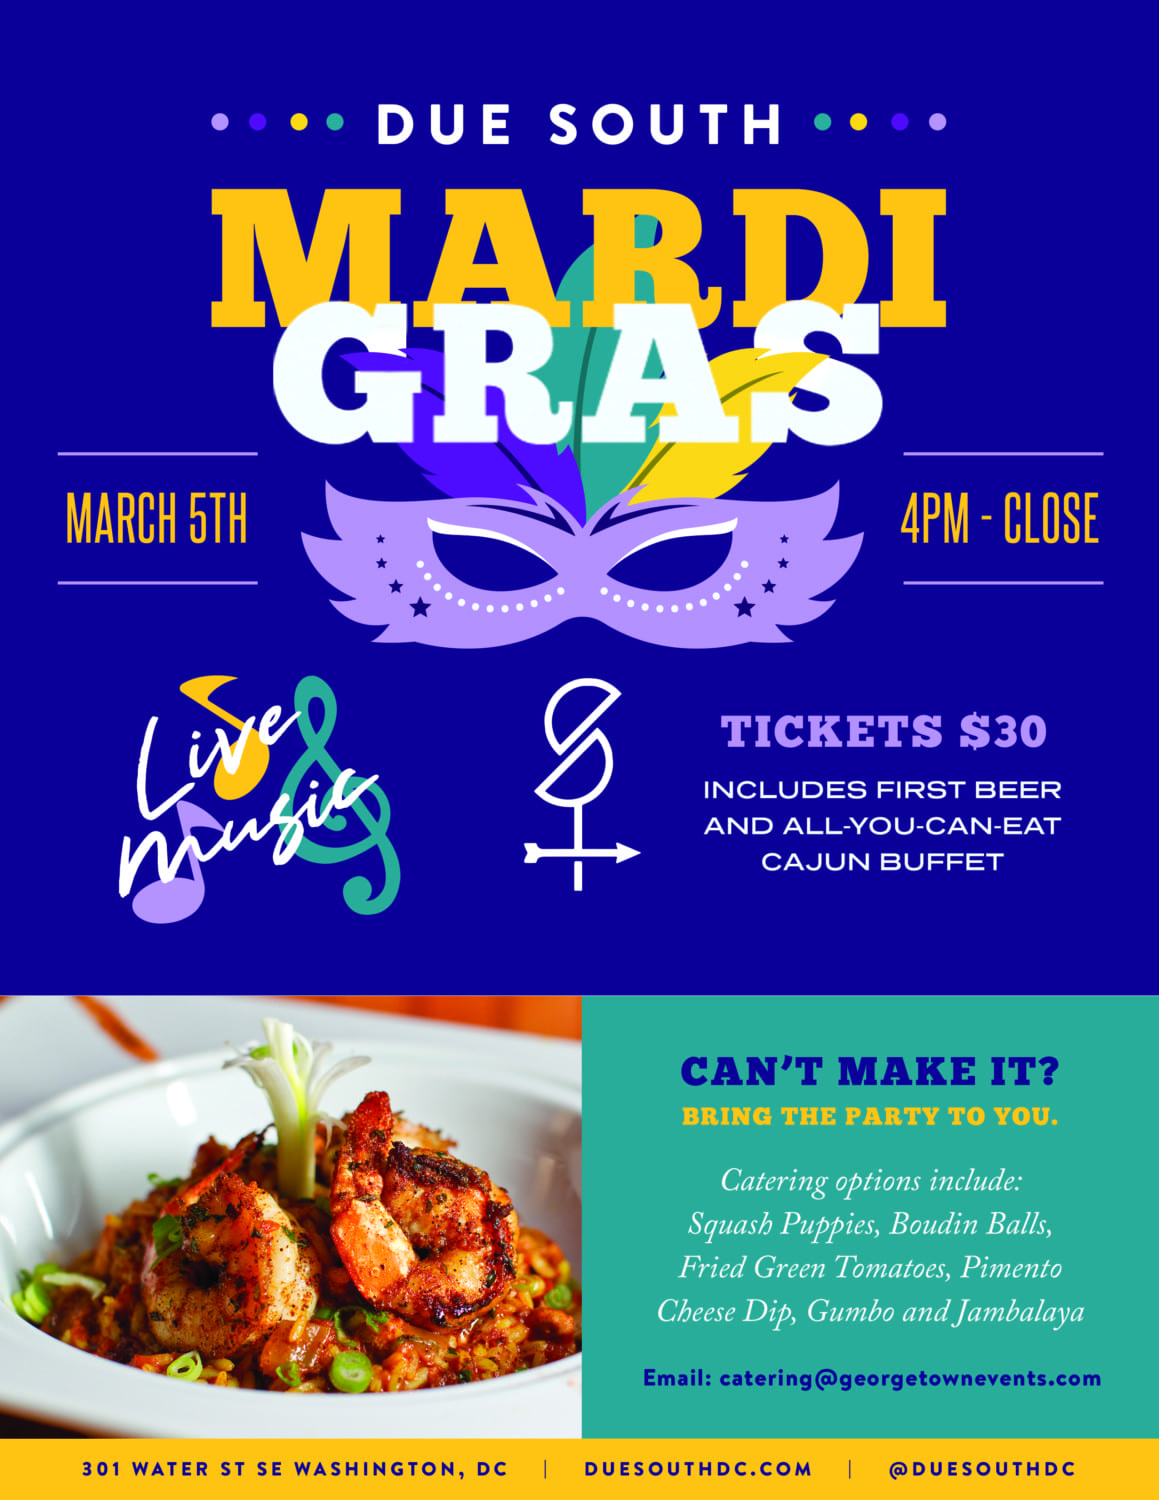 Flyer for Due South's Mardi Gras event with live music, buffet, and live music